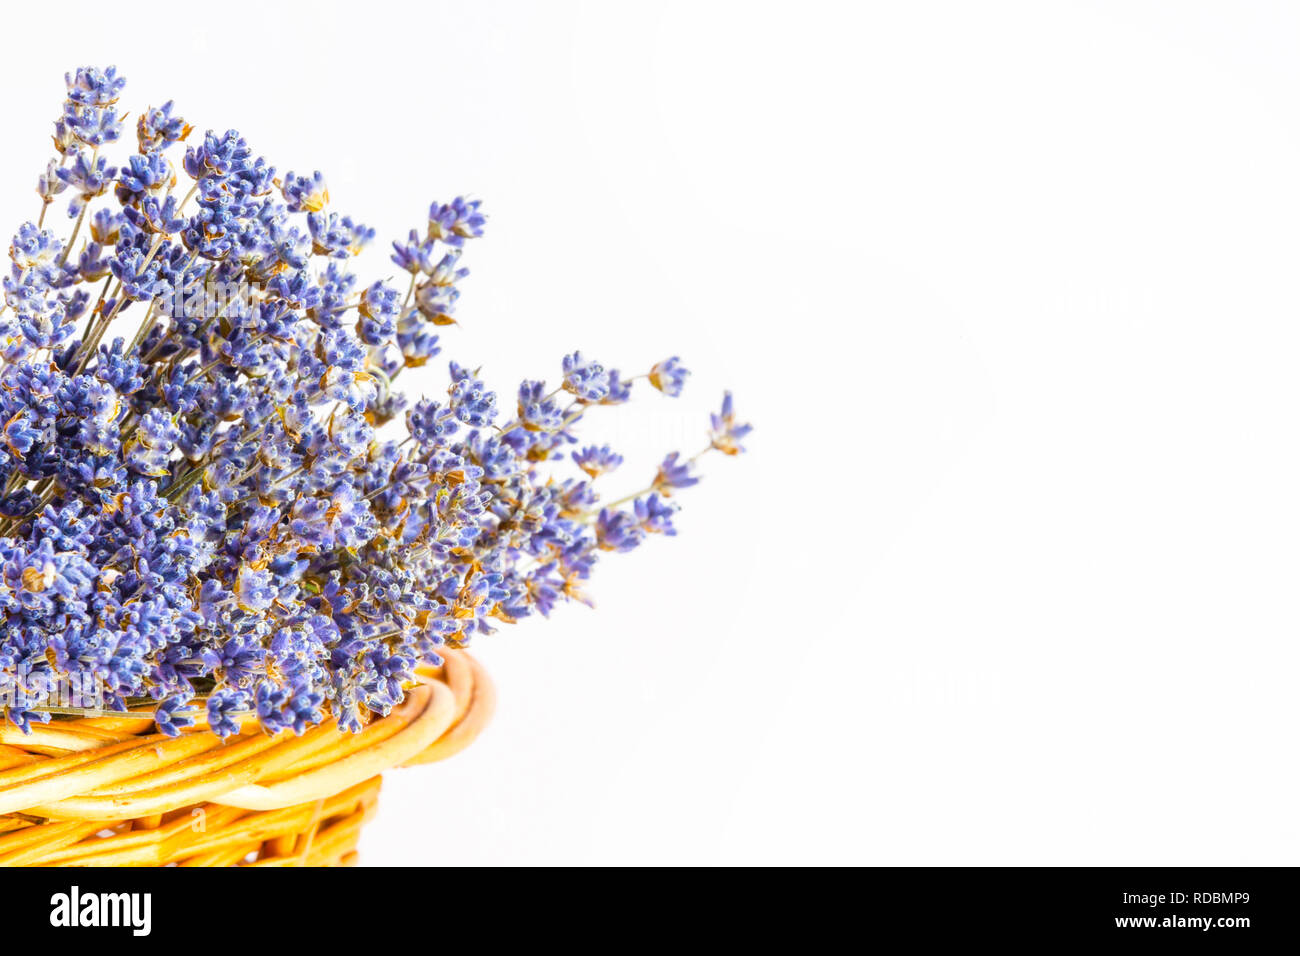 Bunch of dry wild mountain lavender flowers in basket on white background Stock Photo